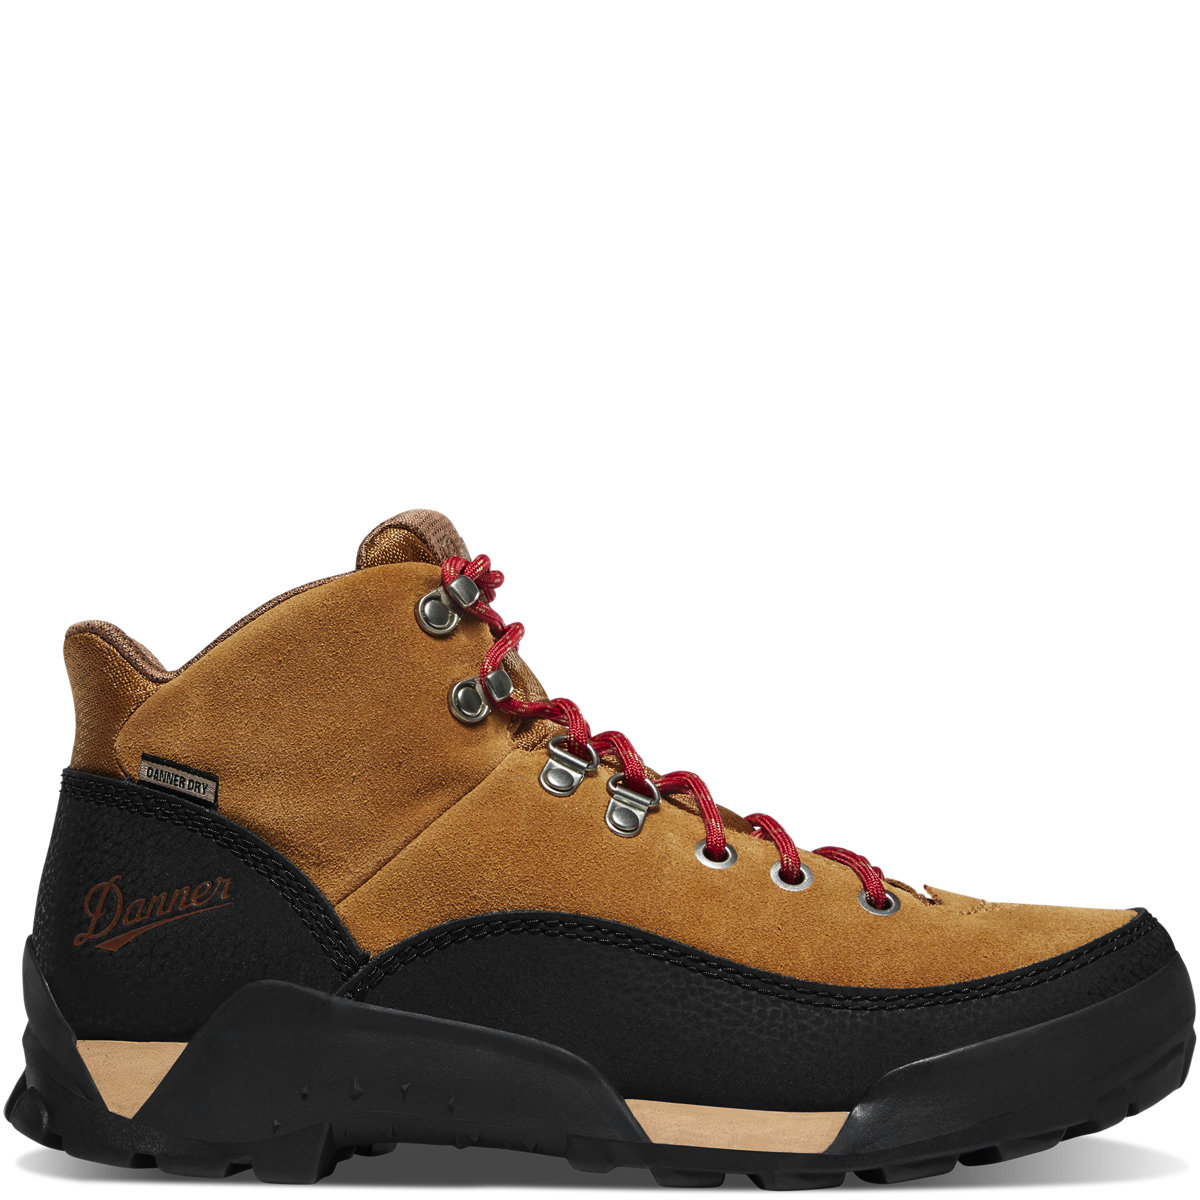 Women's Panorama Mid 6" Brown/Red